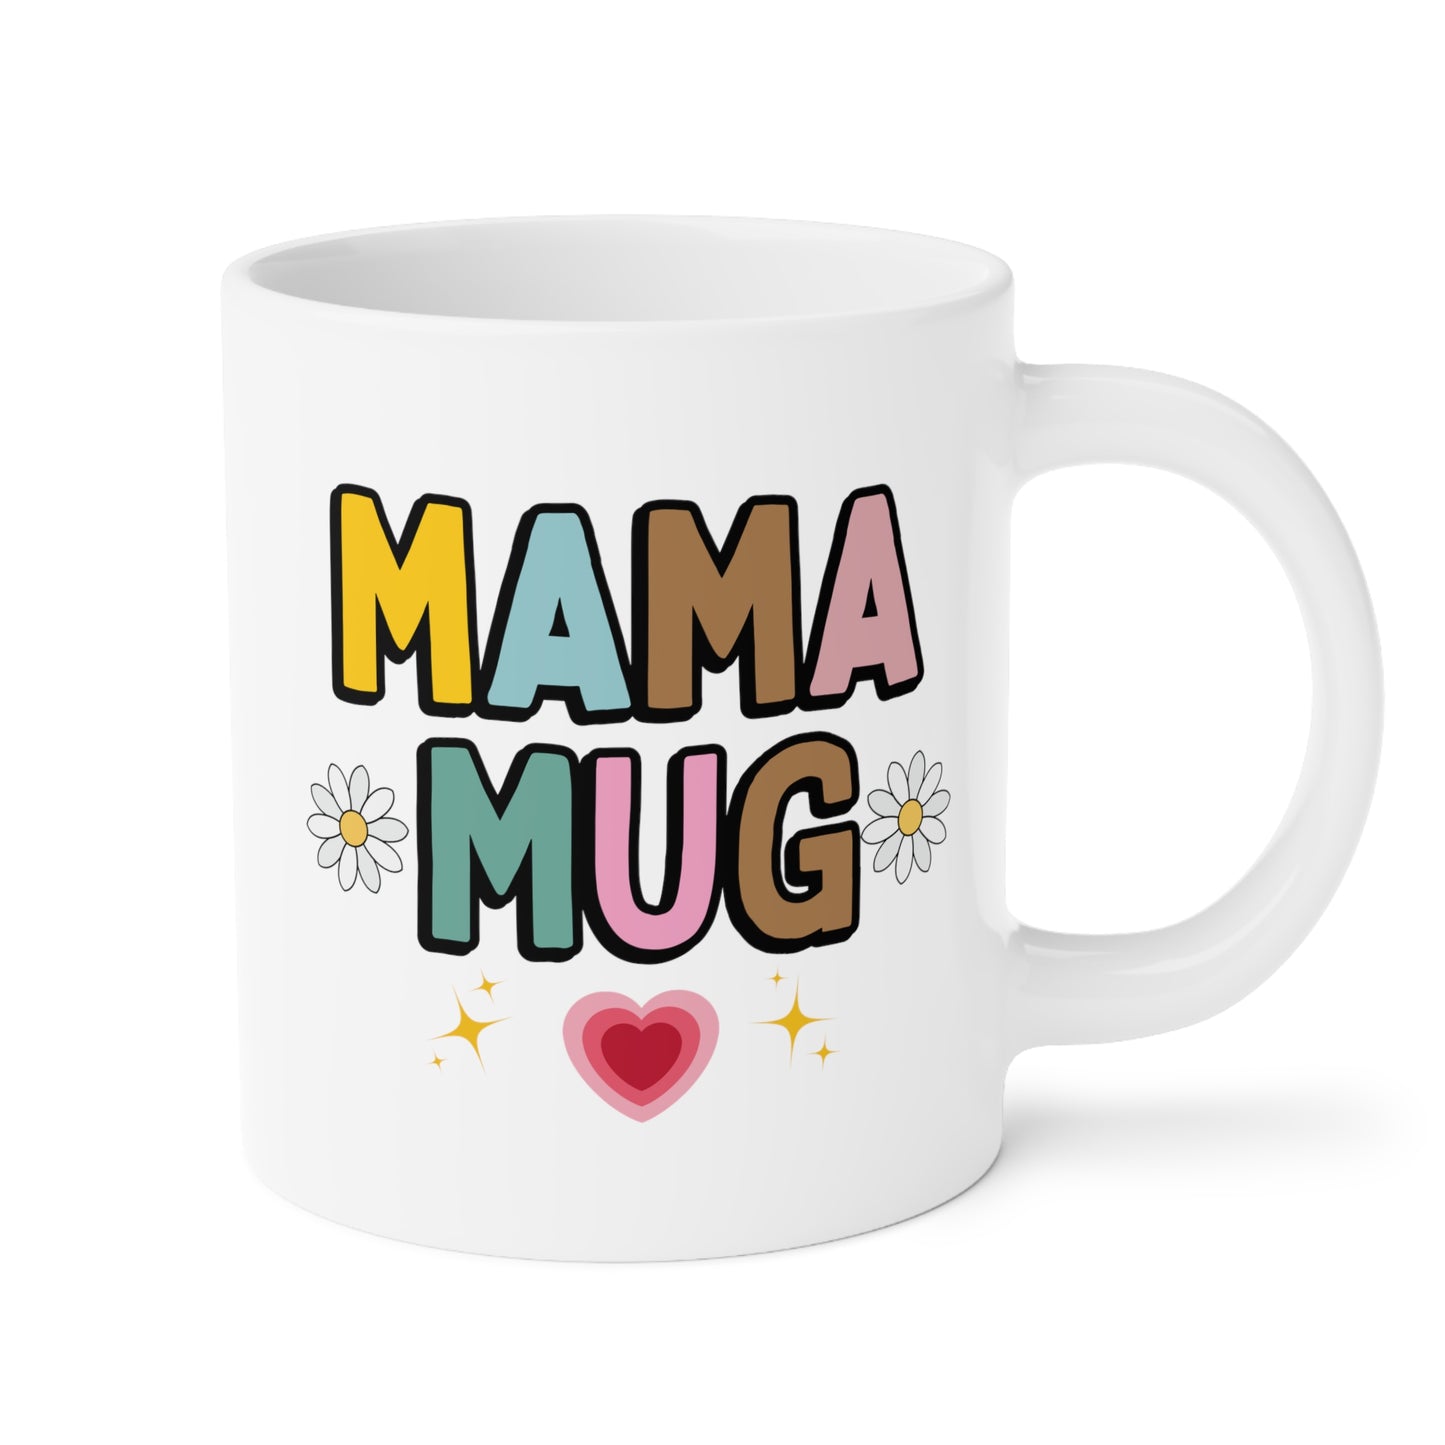 Mama Mug 20oz white funny large coffee mug gift for new mom mother pregnancy announcement baby shower waveywares wavey wares wavywares wavy wares